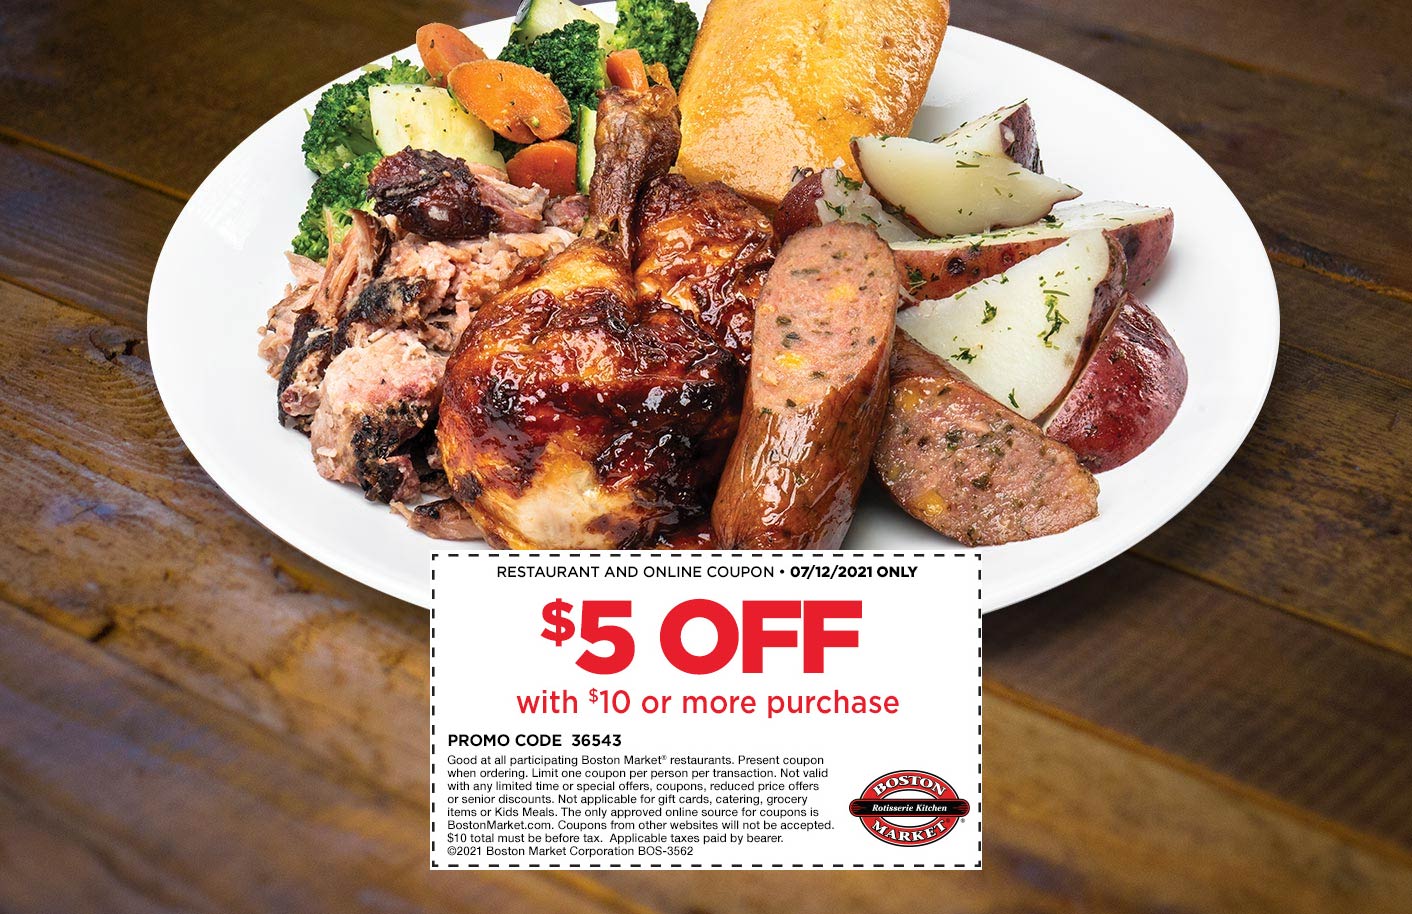 Boston Market restaurants Coupon  $5 off $10 today at Boston Market restaurants #bostonmarket 